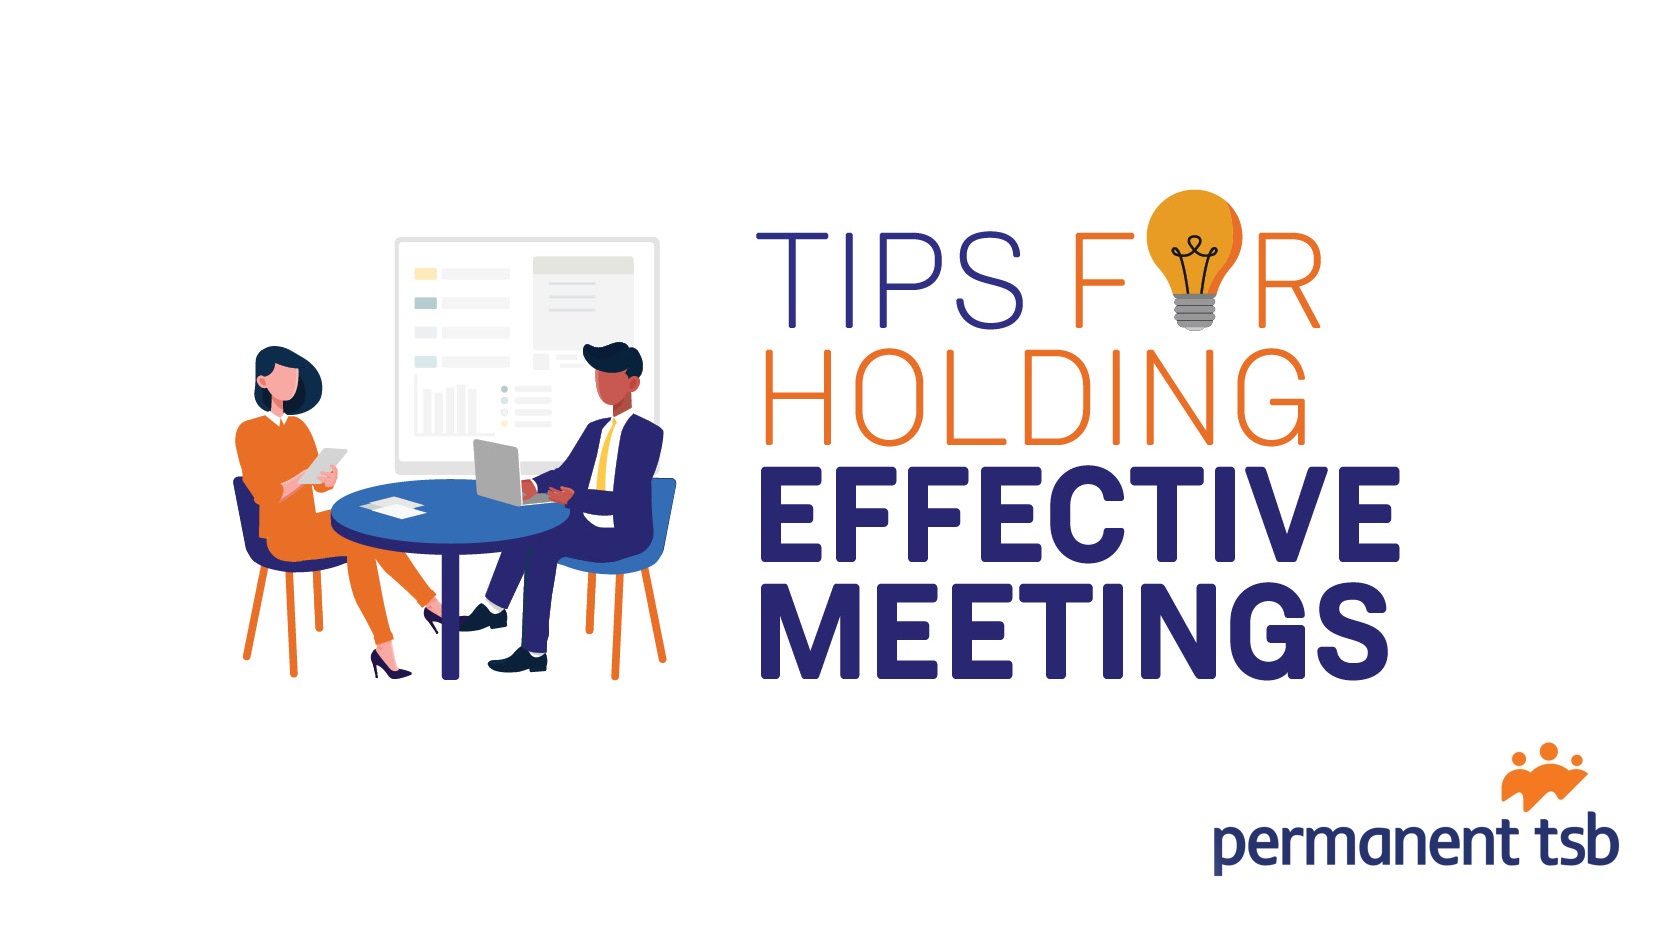 Tips for Holding Effective Meetings